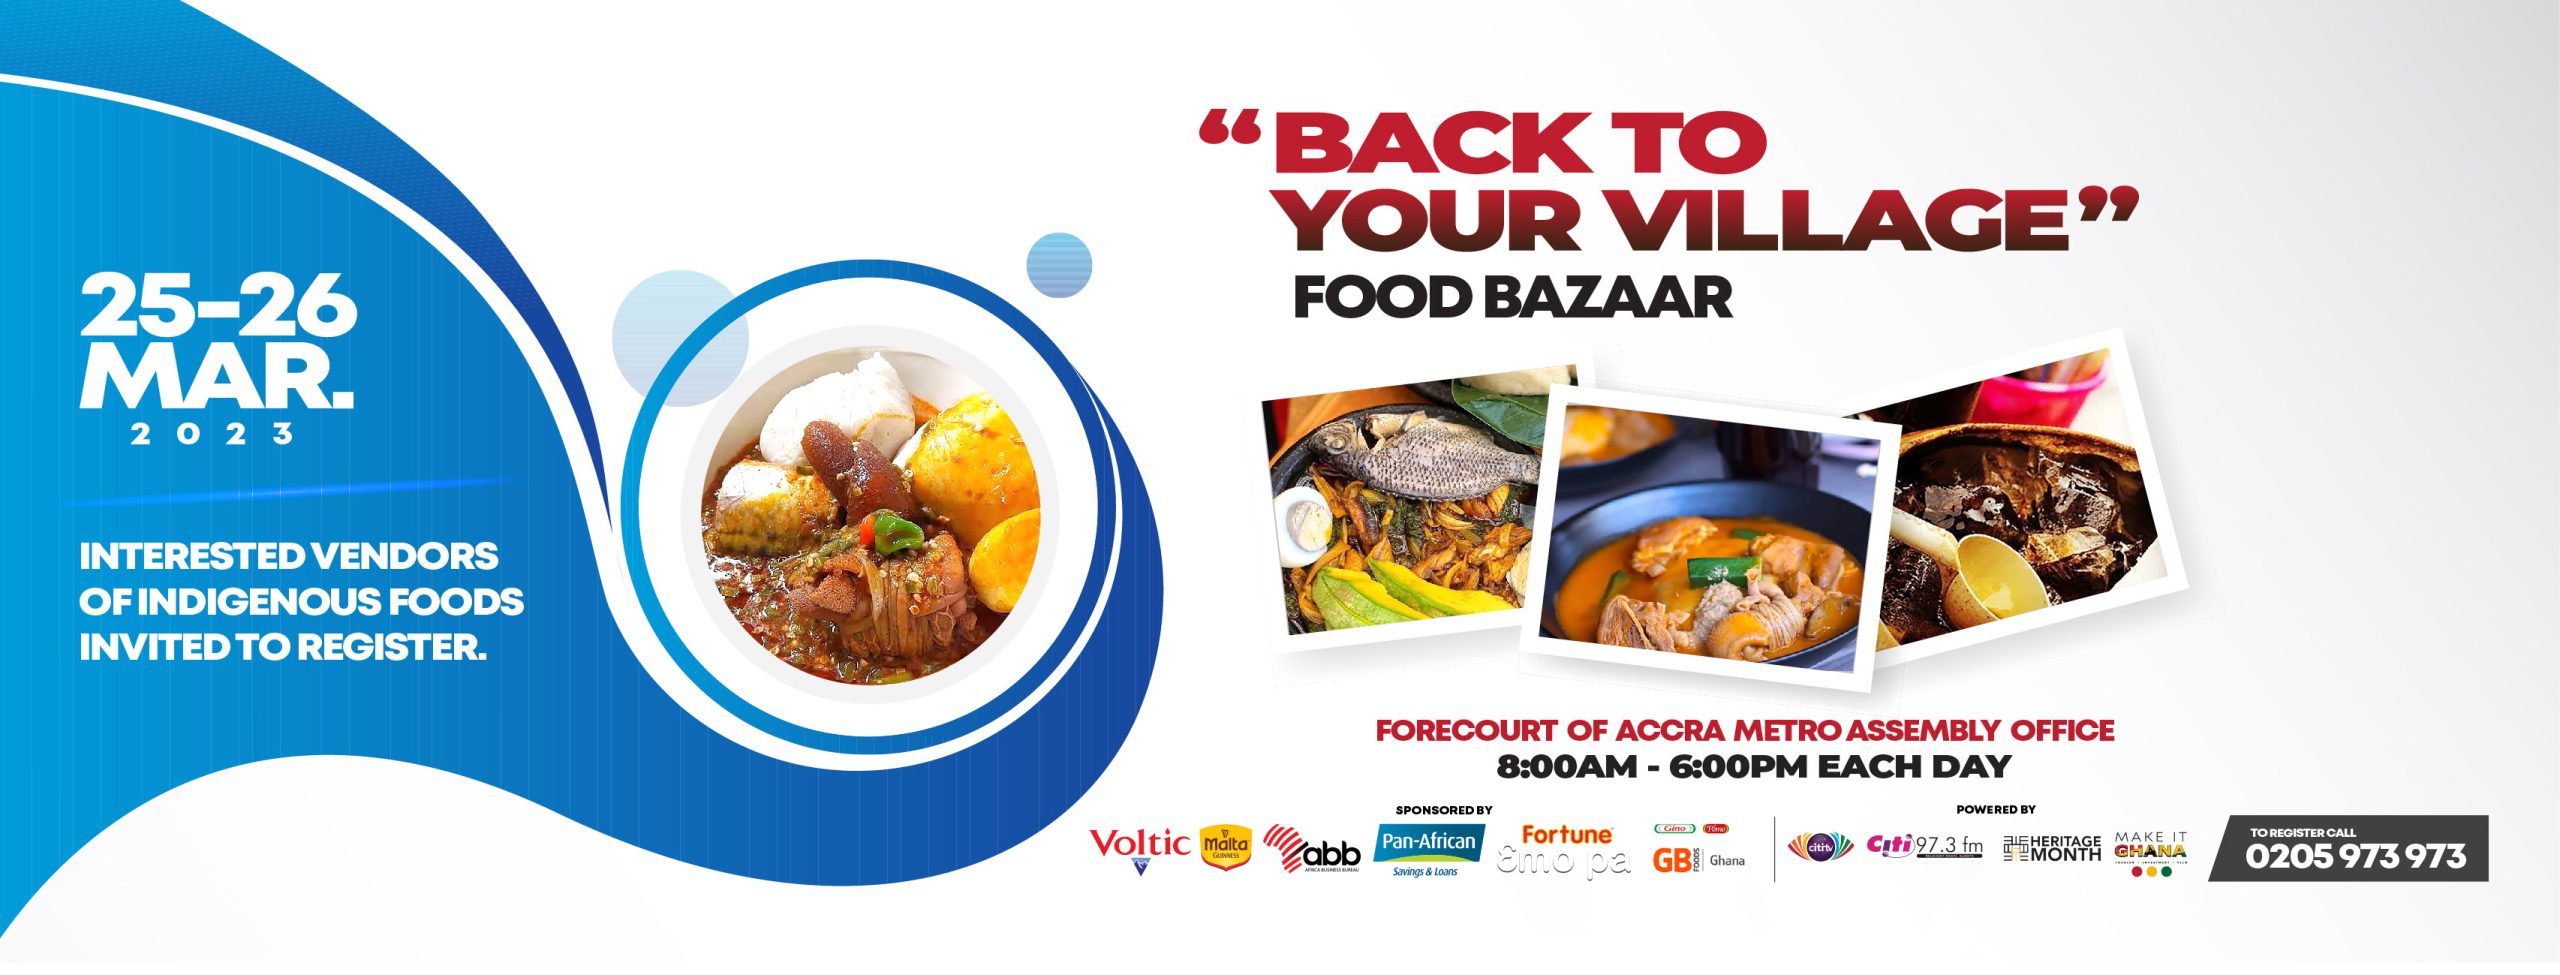 All set for Citi TV/Citi FM ‘Back to your Village Food Bazaar’ this weekend